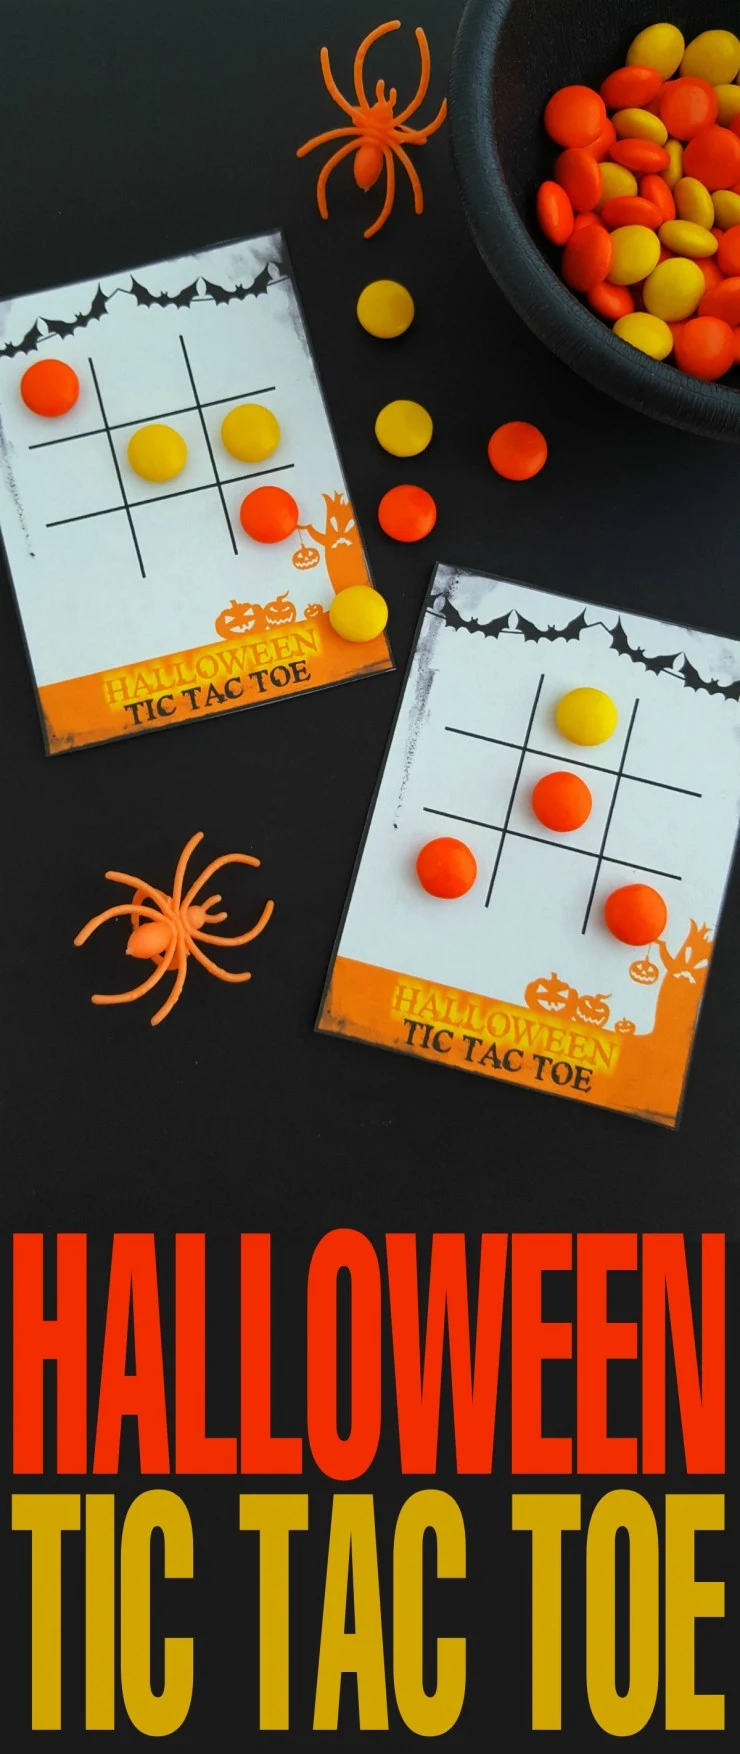 These free printable Halloween Tic Tac Toe cards are super fun and just the right amount of spooky, don’t you think? Print them off and package them up with candy for a fun classroom treat or simply print off and enjoy playing at home!